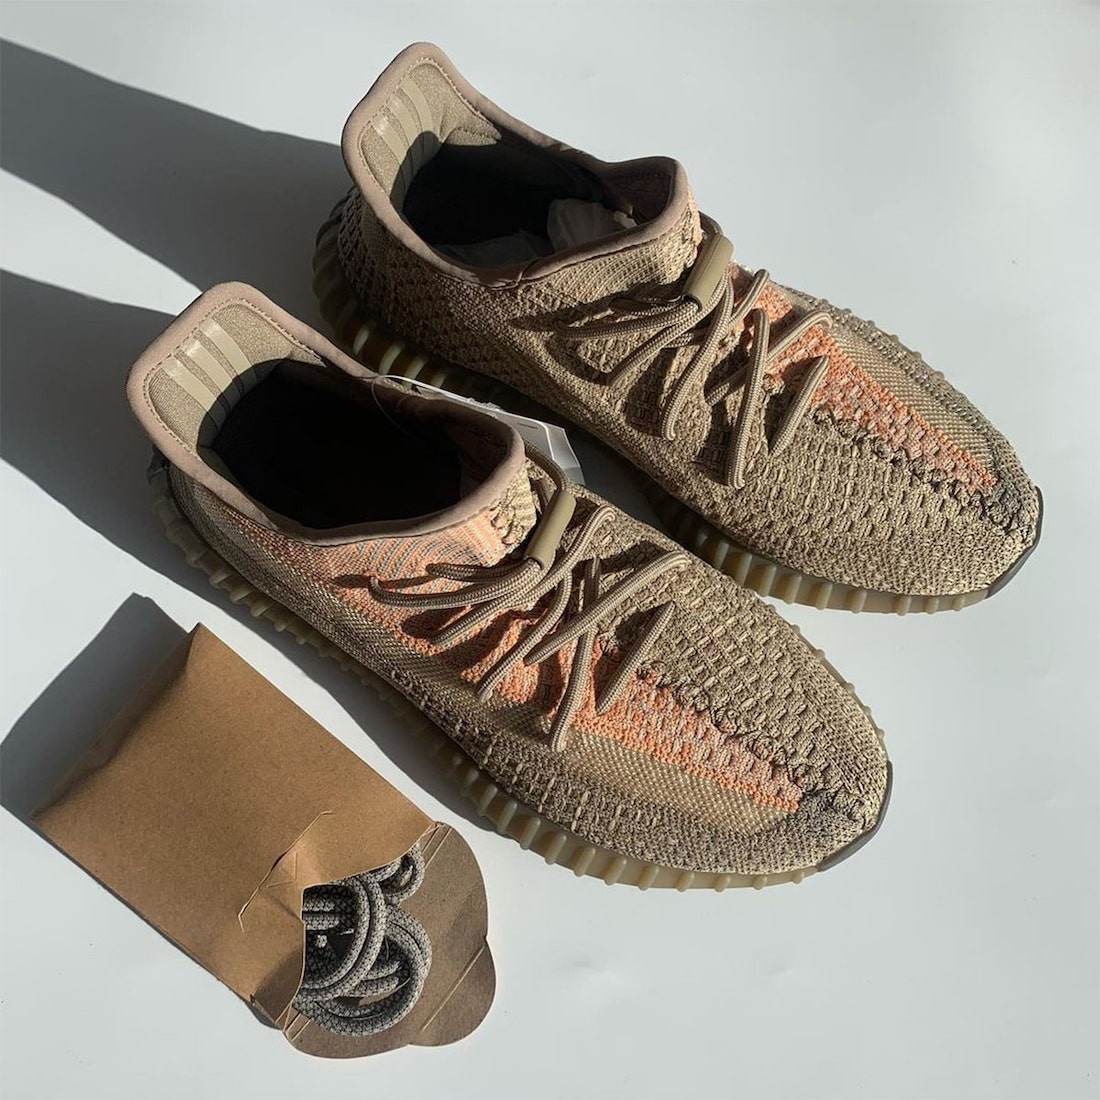 adidas Yeezy Boost 350 V2 Sand Taupe Eliada Release Date